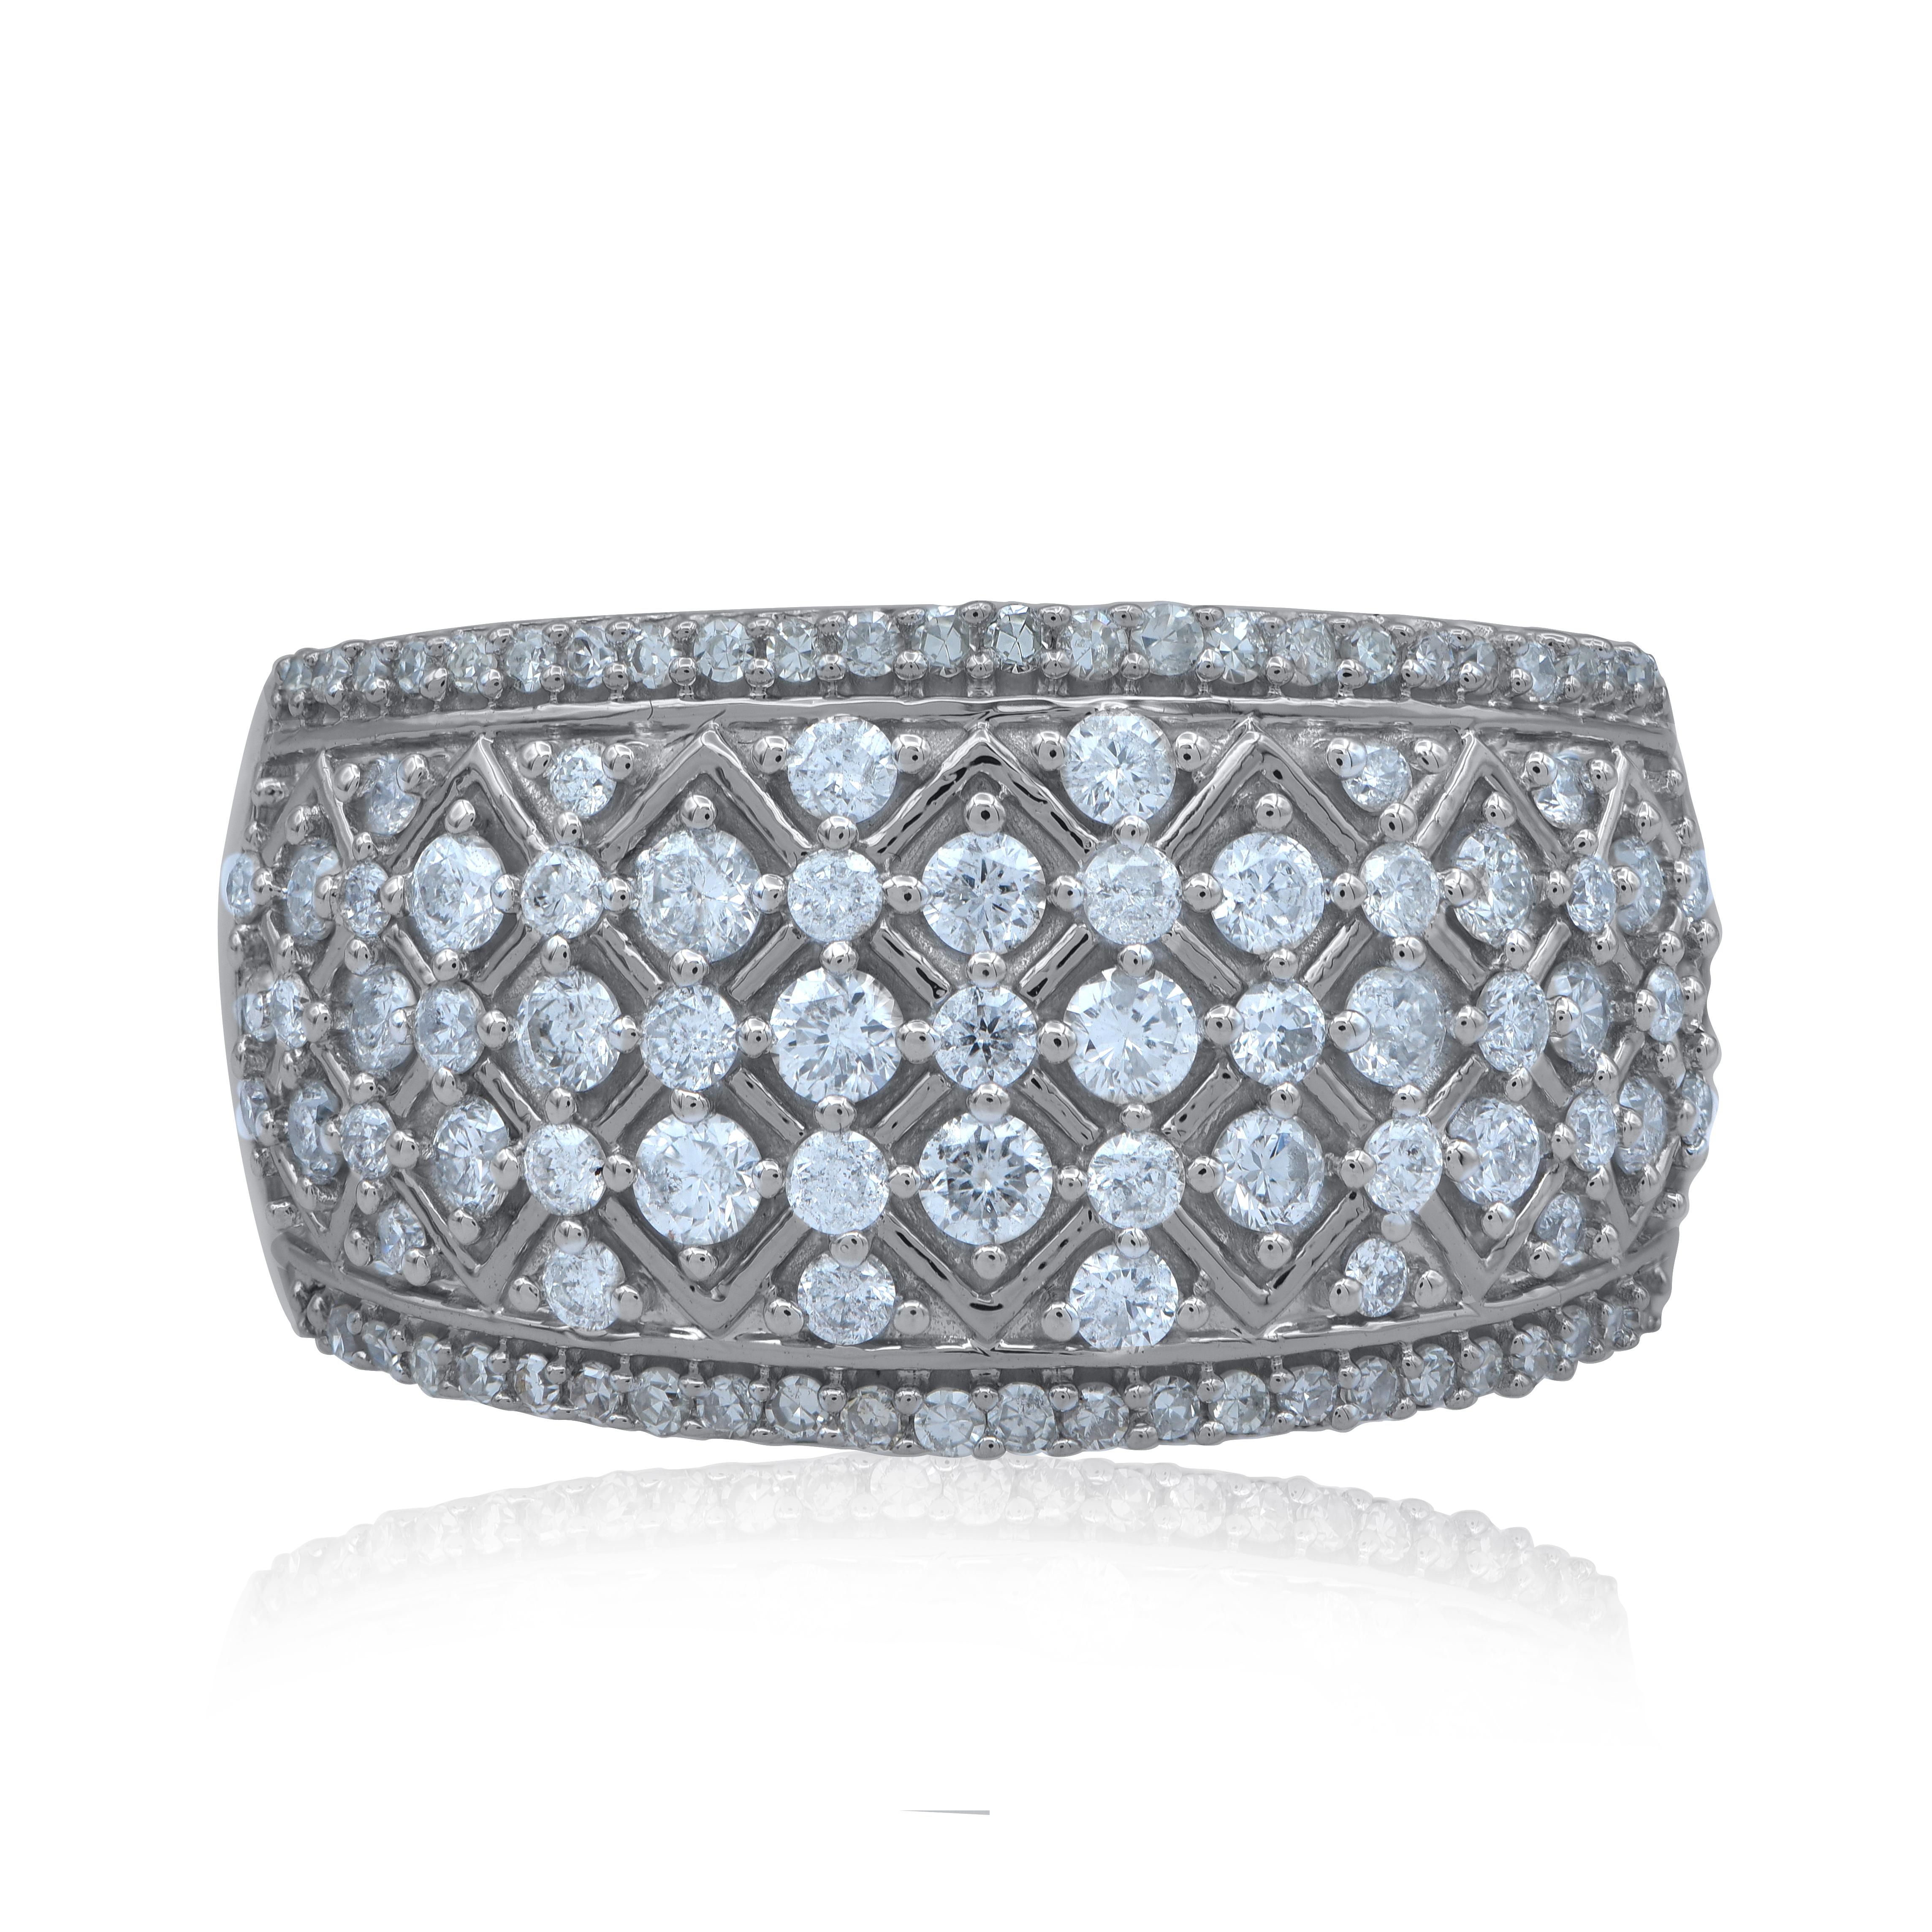 Beautiful Round Natural Diamond Wide Band Ring. This ring is beautifully designed and prong set with 105 round brilliant cut Diamonds. The ring is a vintage style band . The total weight of diamonds 1.0 carat, H-I Color and I2 Clarity. This ring has